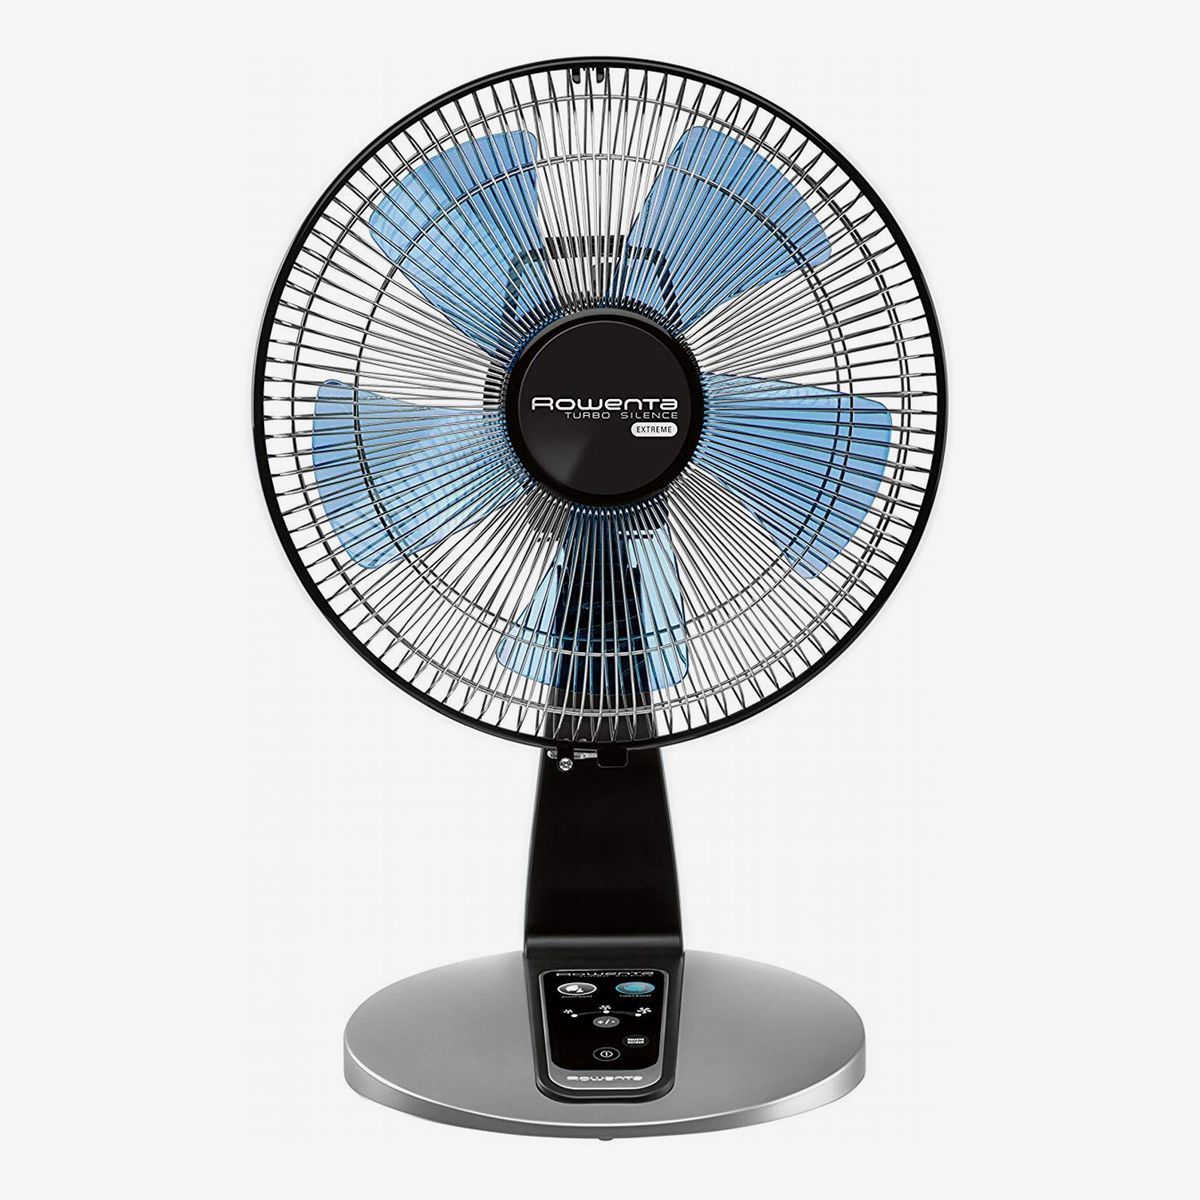 Snowpea Quiet Desk Fan Oscillating Room Fan 5 Speeds 25dB Silent Table Fan Air Circulator Fan with Remote Control 8000mAh Battery for Outdoor Bedroom Office Living Room Green